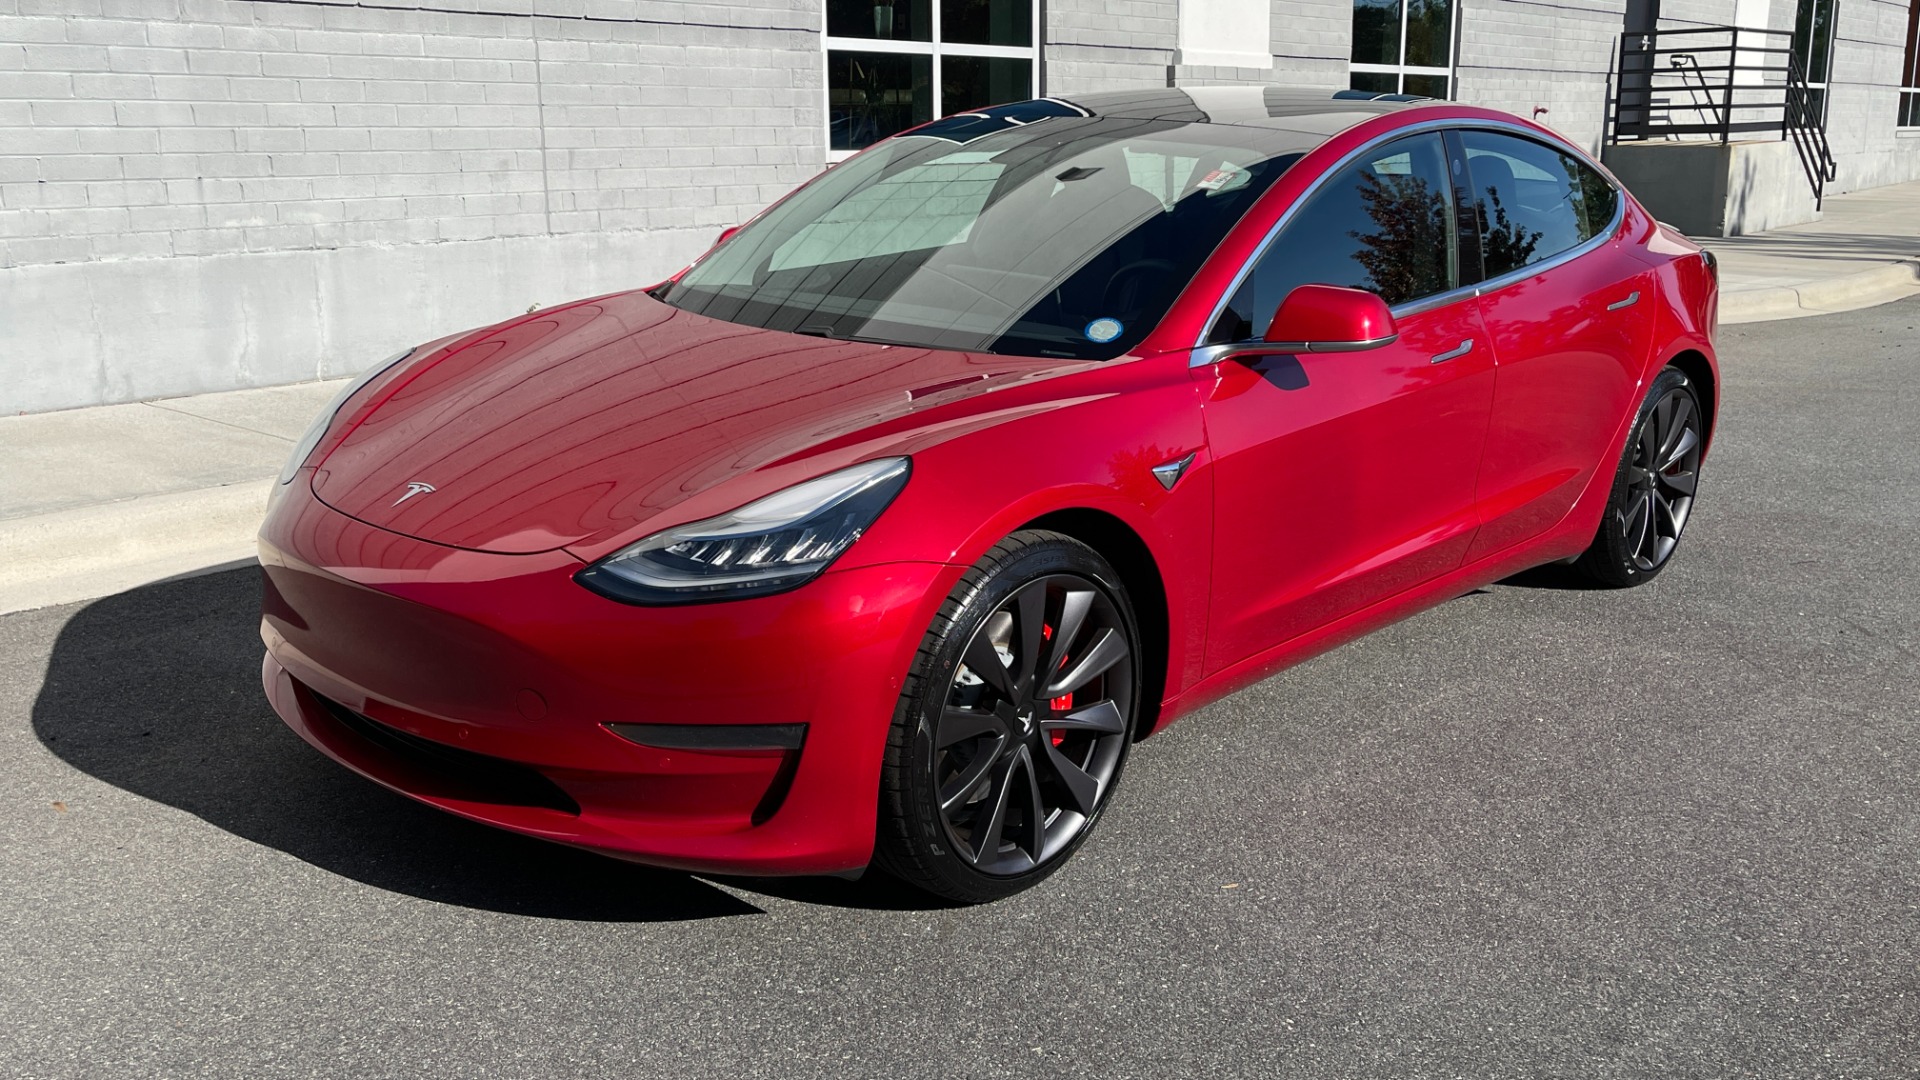 Used 2020 Tesla Model 3 PERFORMANCE / 20IN WHEELS / PERFORMANCE BRAKES / CARBON FIBER TRIM for sale $43,995 at Formula Imports in Charlotte NC 28227 3